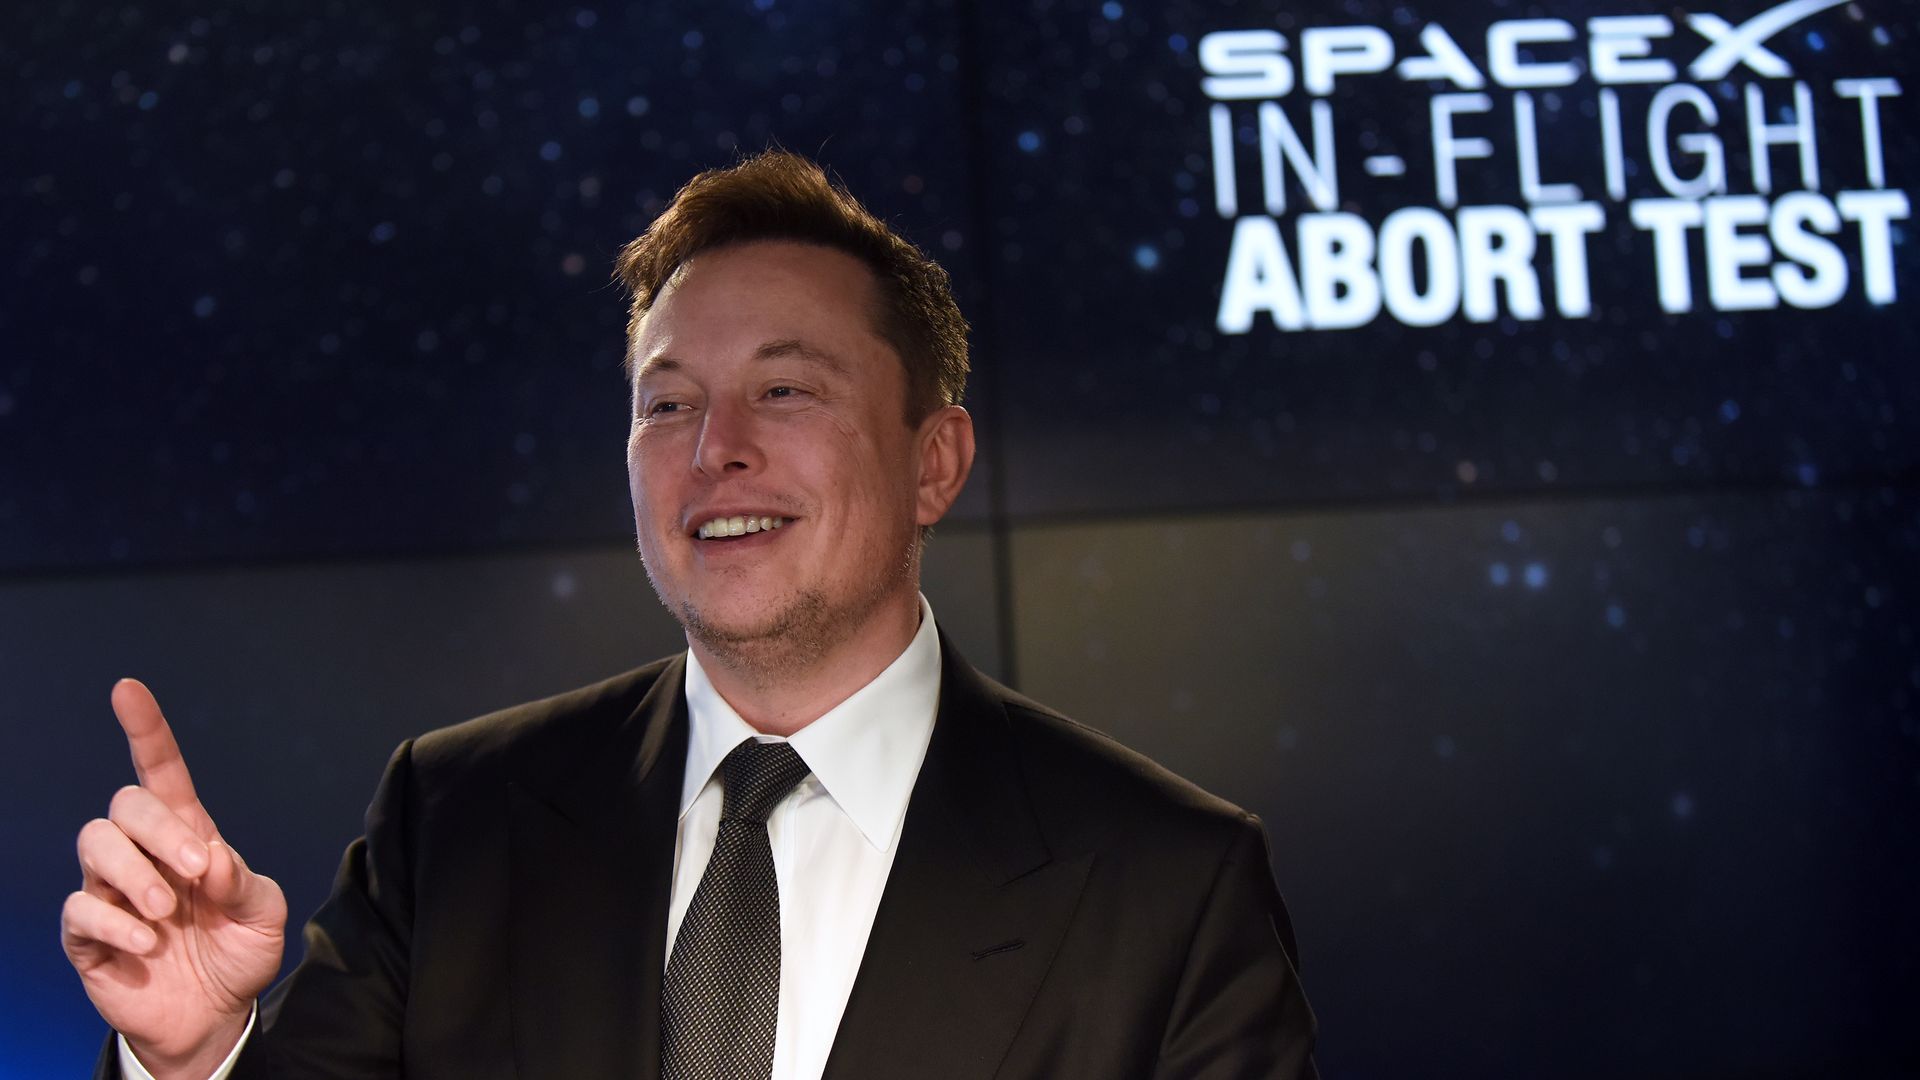 In this image, Elon Musk stands in a suit and tie in front of a large monitor that says "SpaceX in-flight abort test"